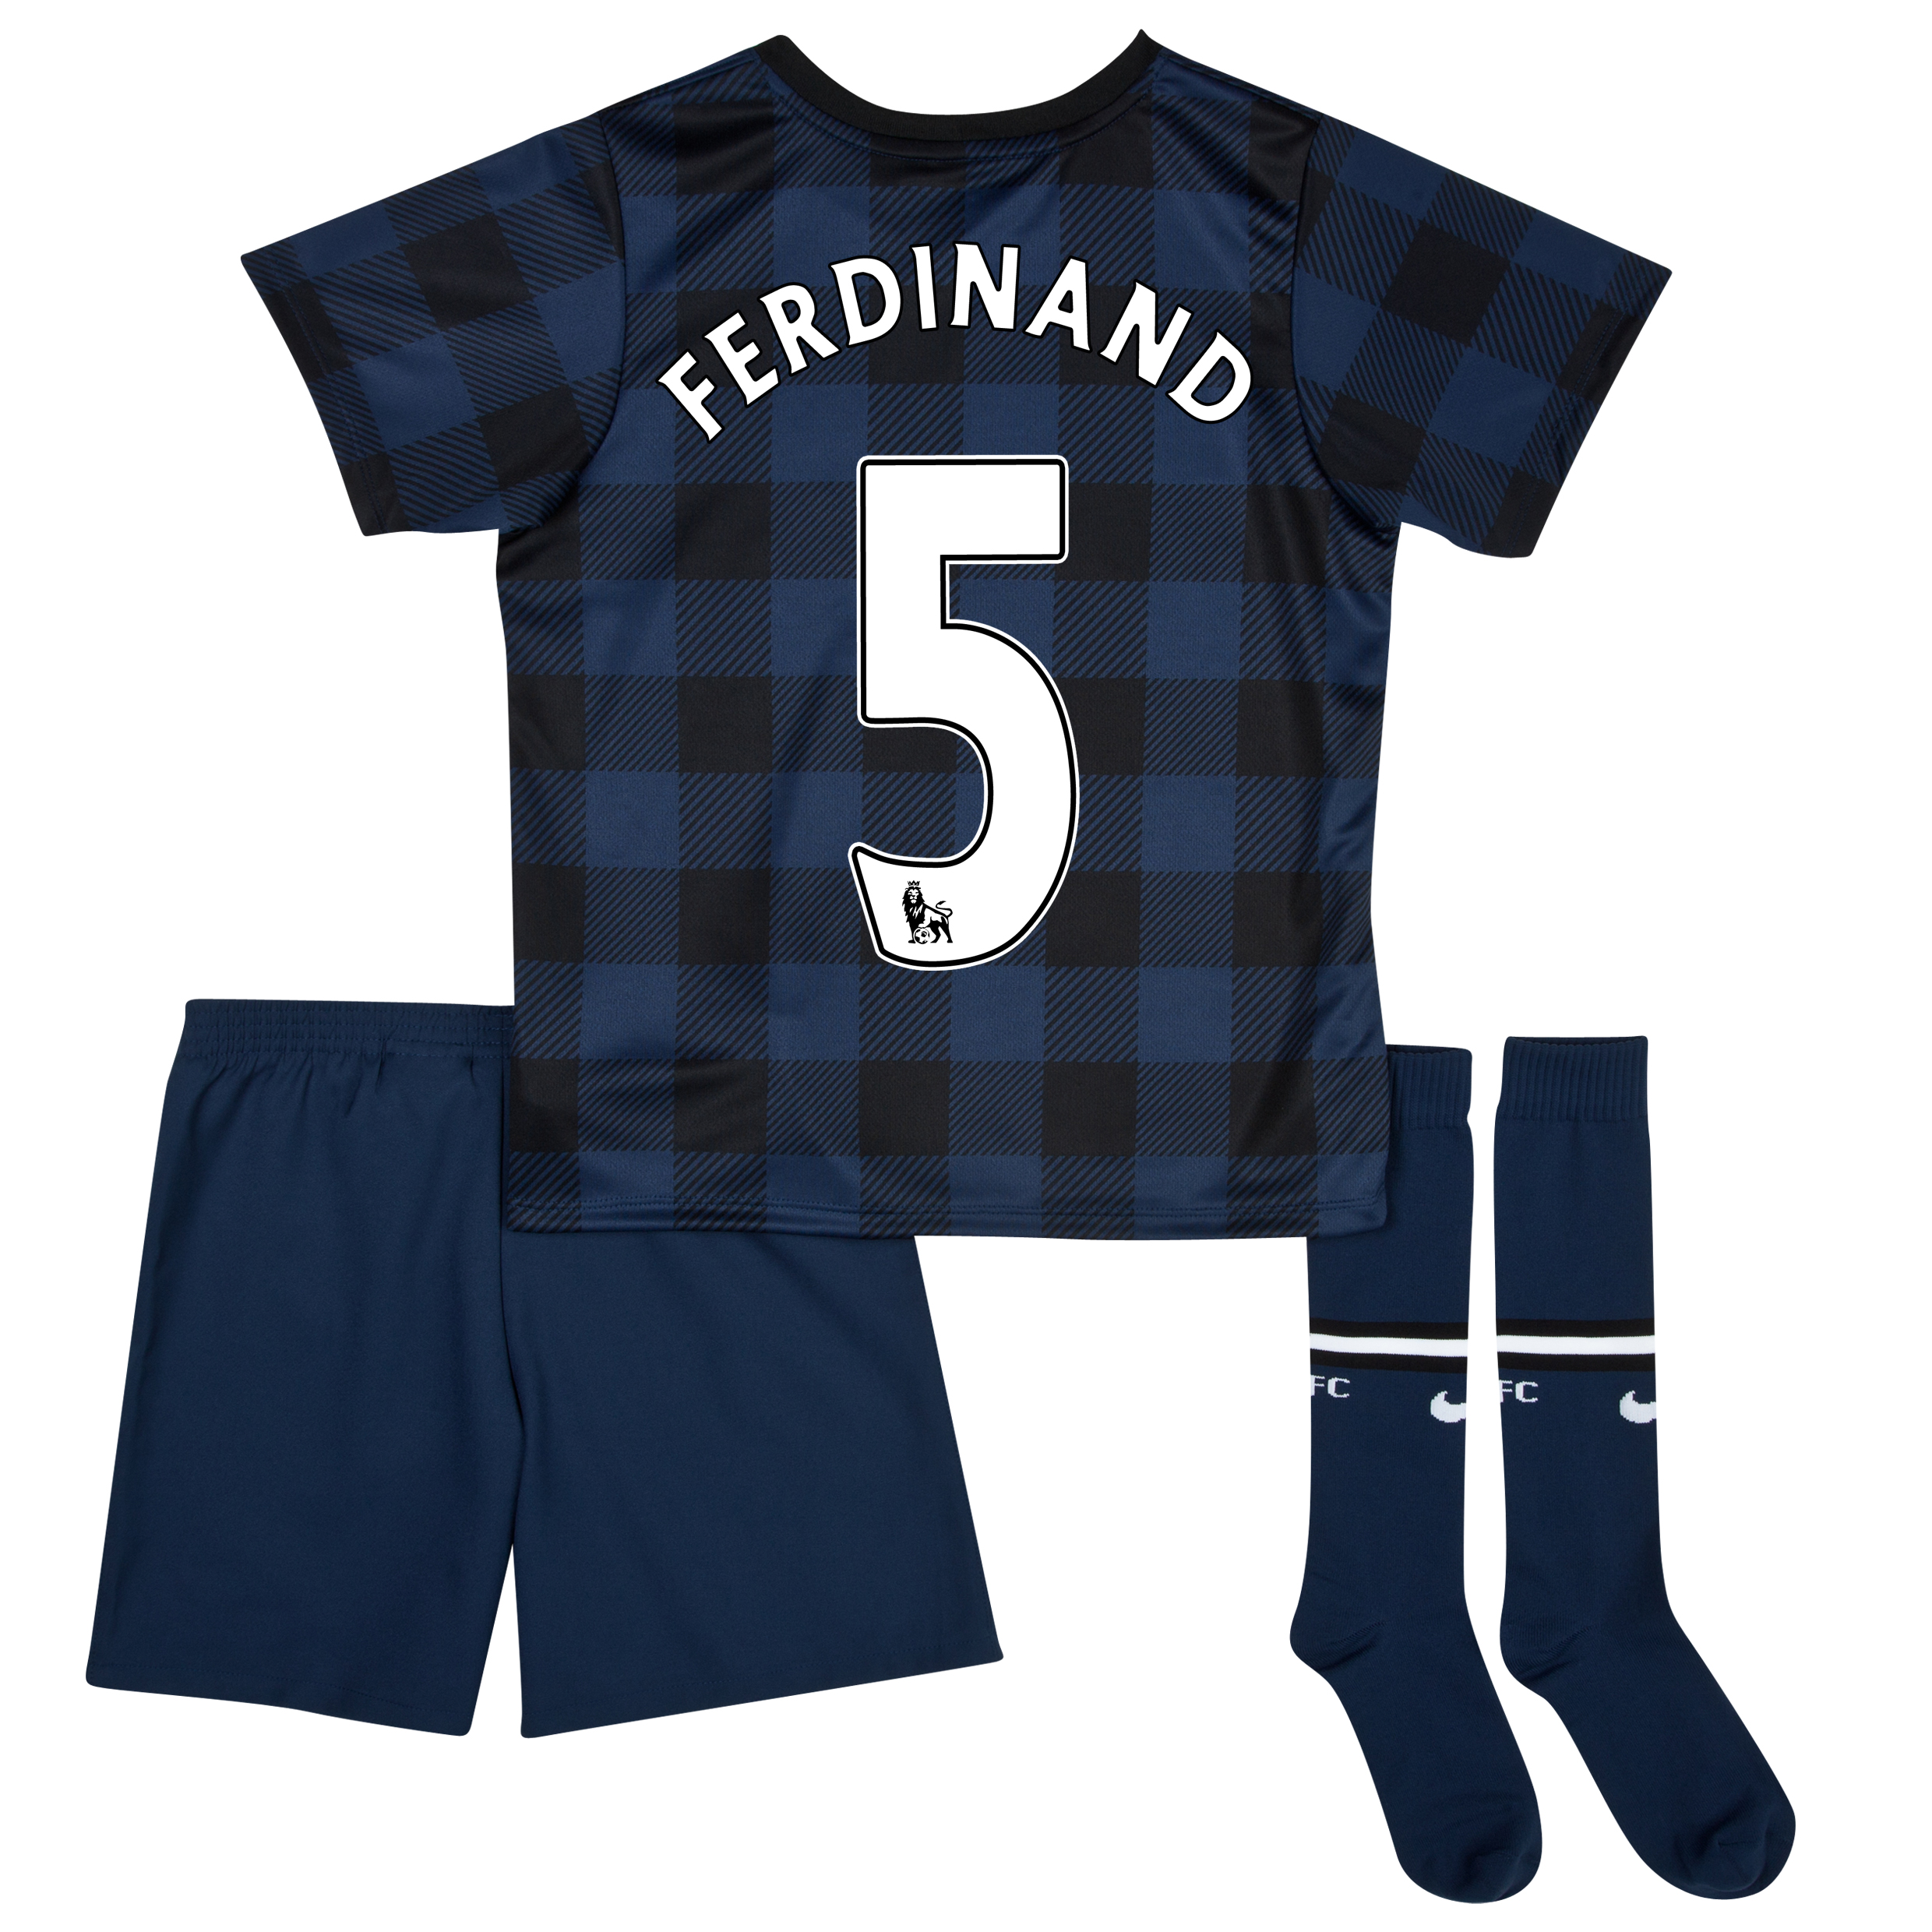 Manchester United Away Kit 2013/14 - Little Boys with Ferdinand 5 printing